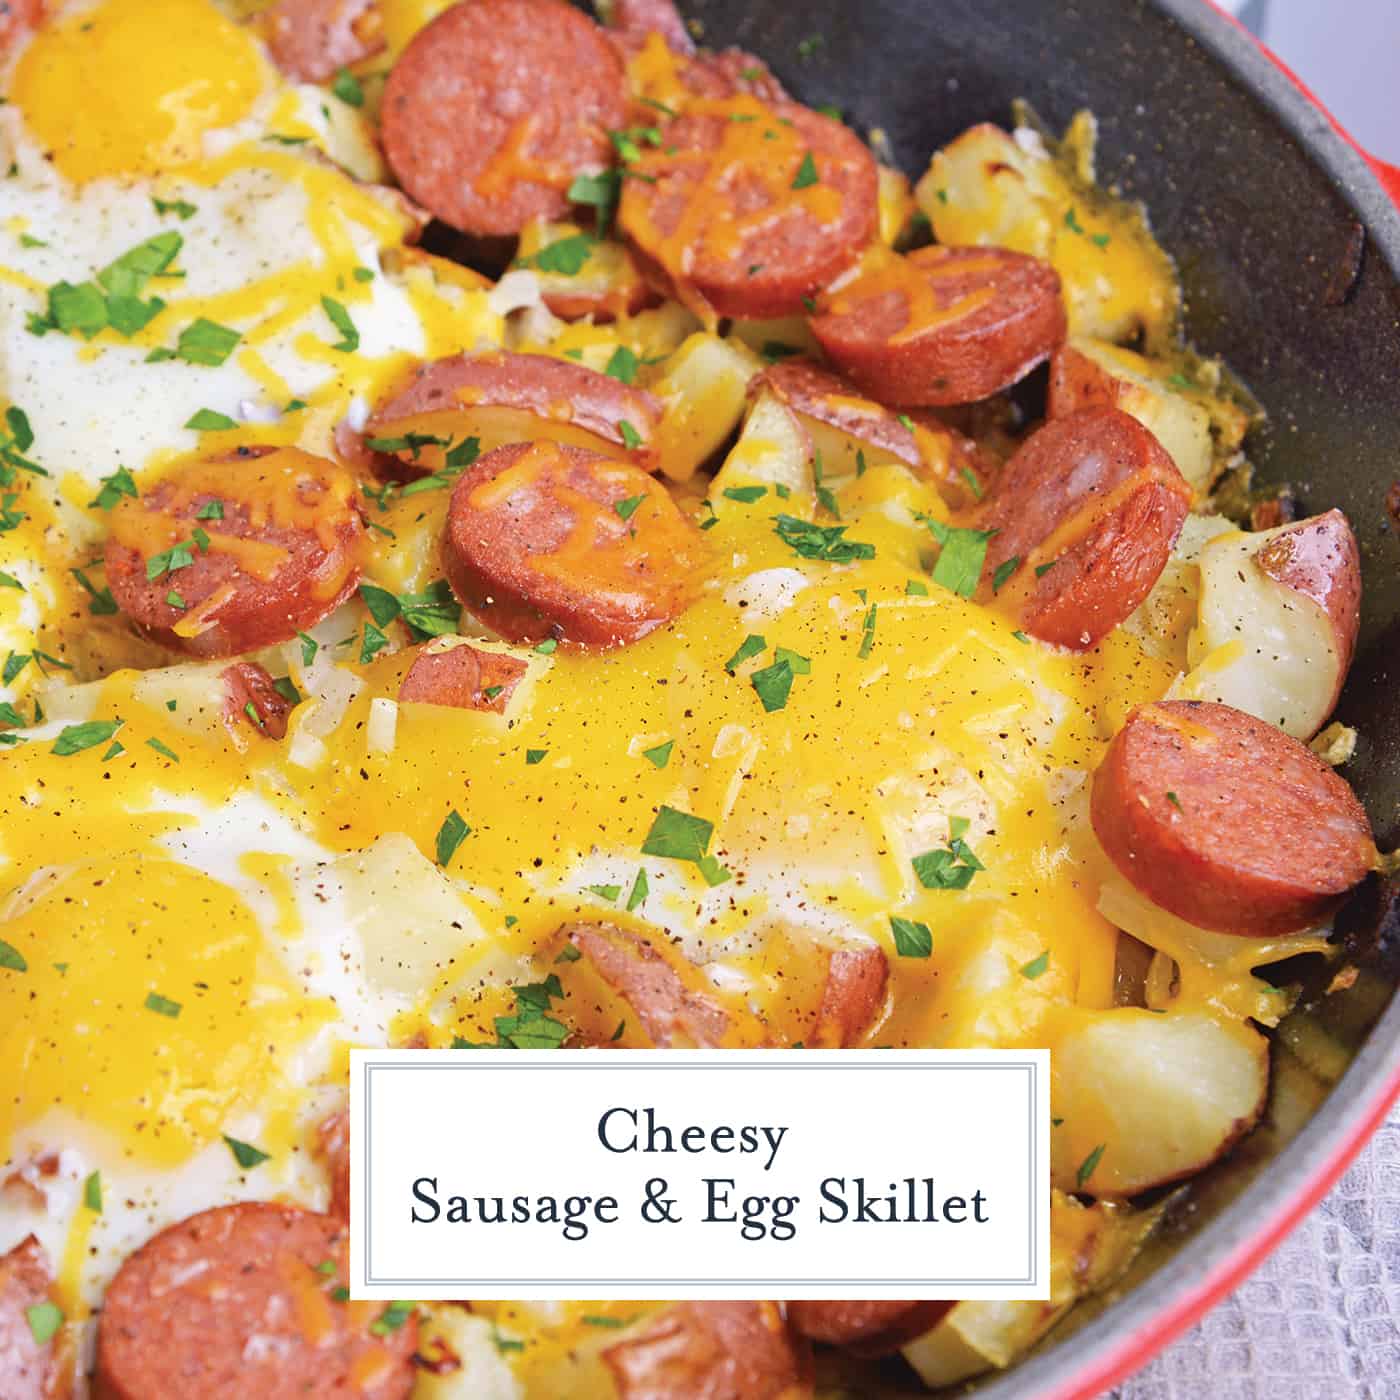 Sausage and Egg Skillet is a delicious breakfast skillet with andouille sausage, potato, eggs and gooey cheese. Ready in 30 minutes and perfect for special weekend brunch! #breakfastskilletrecipe #castironskilletrecipes www.savoryexperiments.com